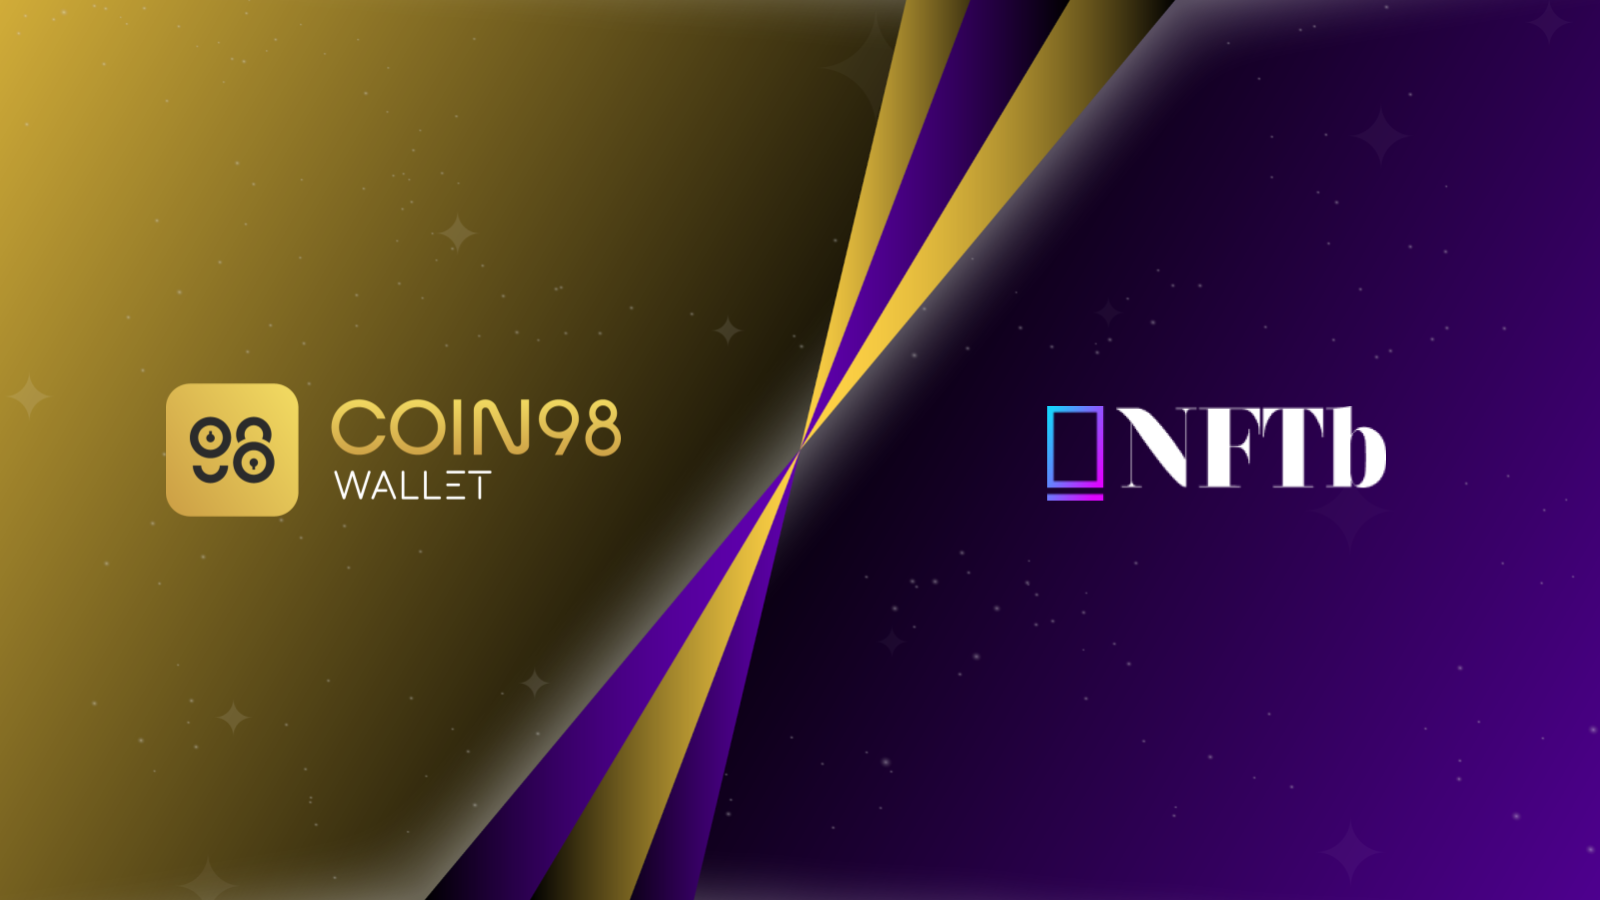 Coin98 Wallet integrates with NFTb